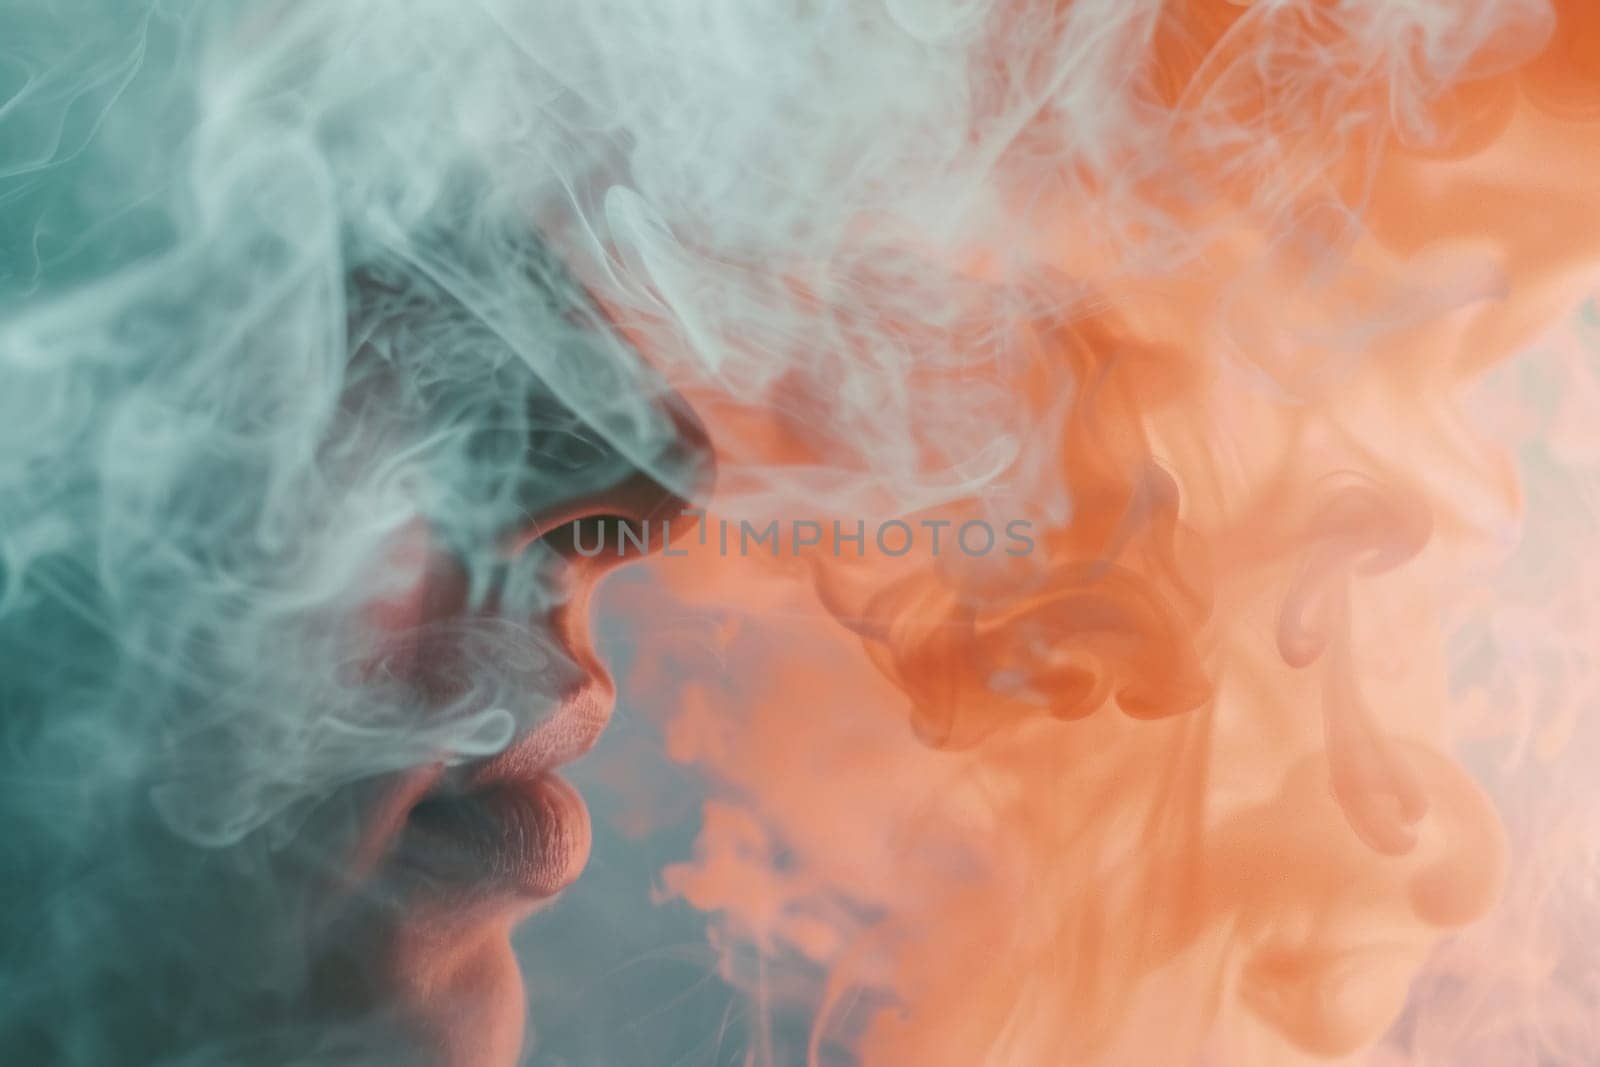 Ethereal close-up of a person's skin enveloped in a soft mist, capturing a dreamy, surreal quality and the glow of healthy skin.